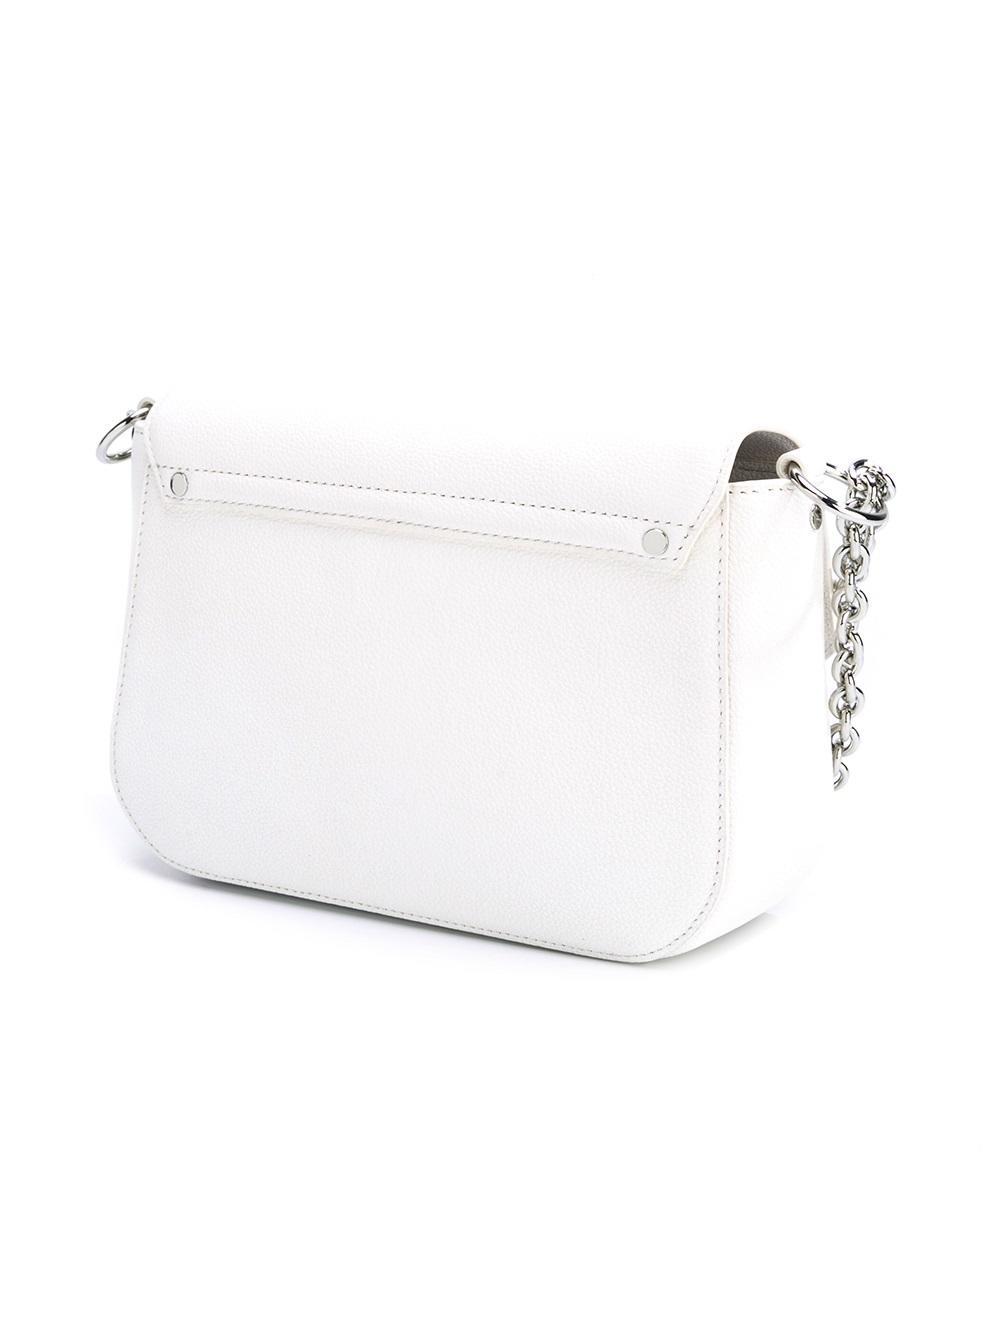 Versus Leather Chain Strap Shoulder Bag in White - Lyst